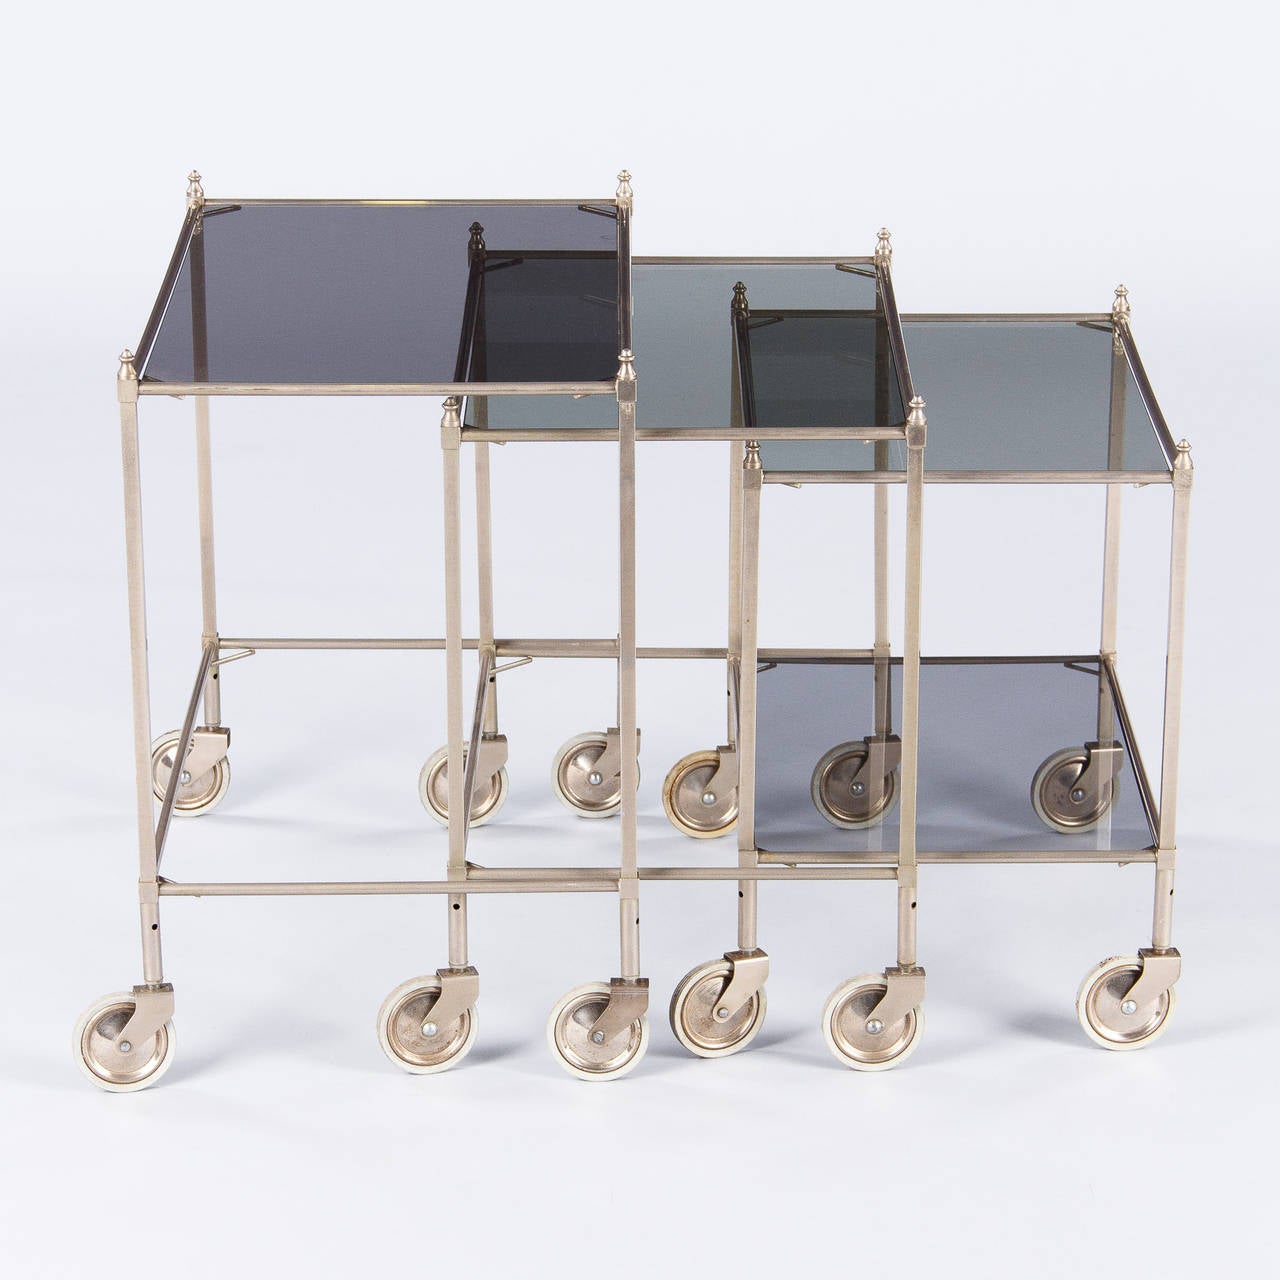 Polished Set of Three Nickel Nesting Tables from Germany, 1970s